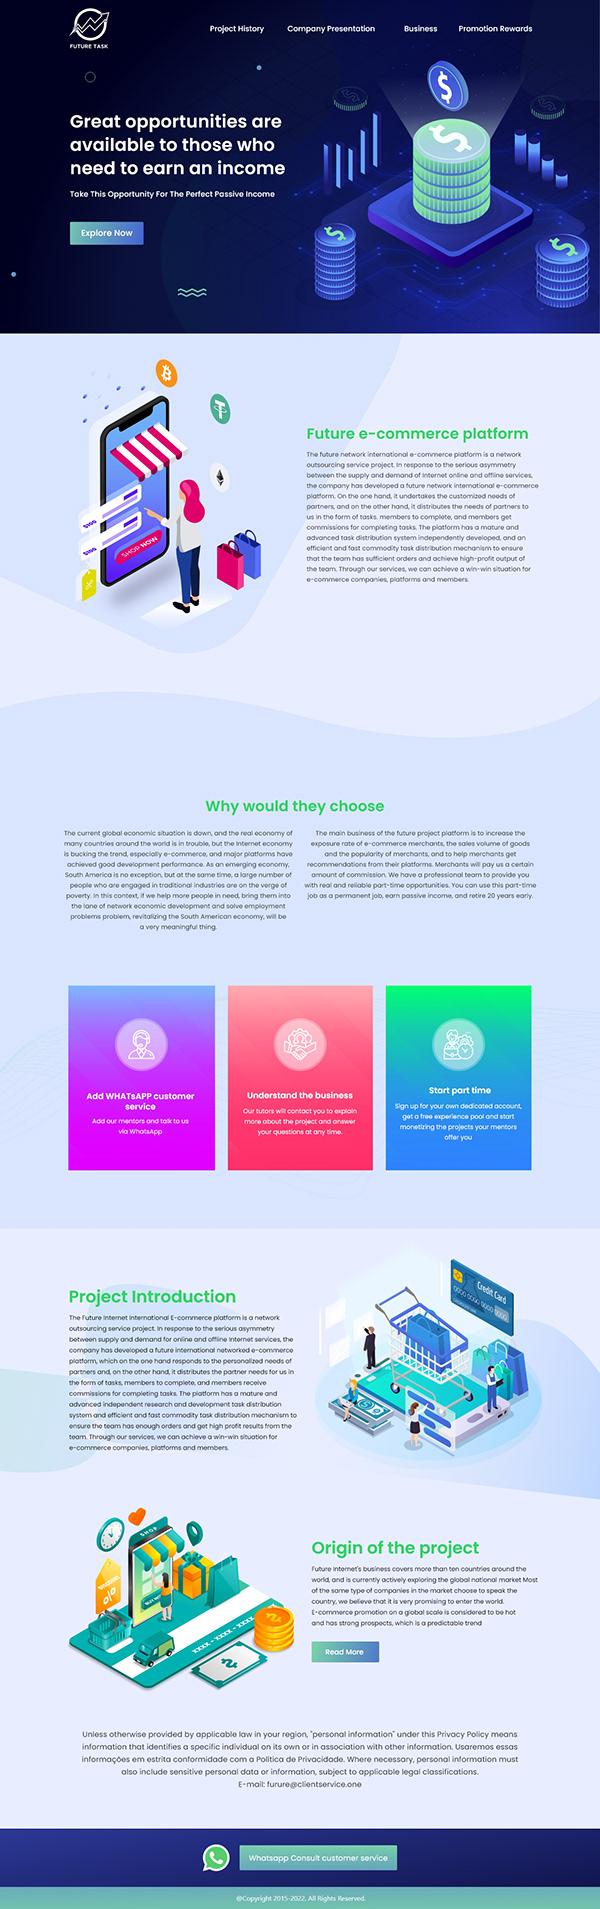 Cryptocurrency Landing Page Design